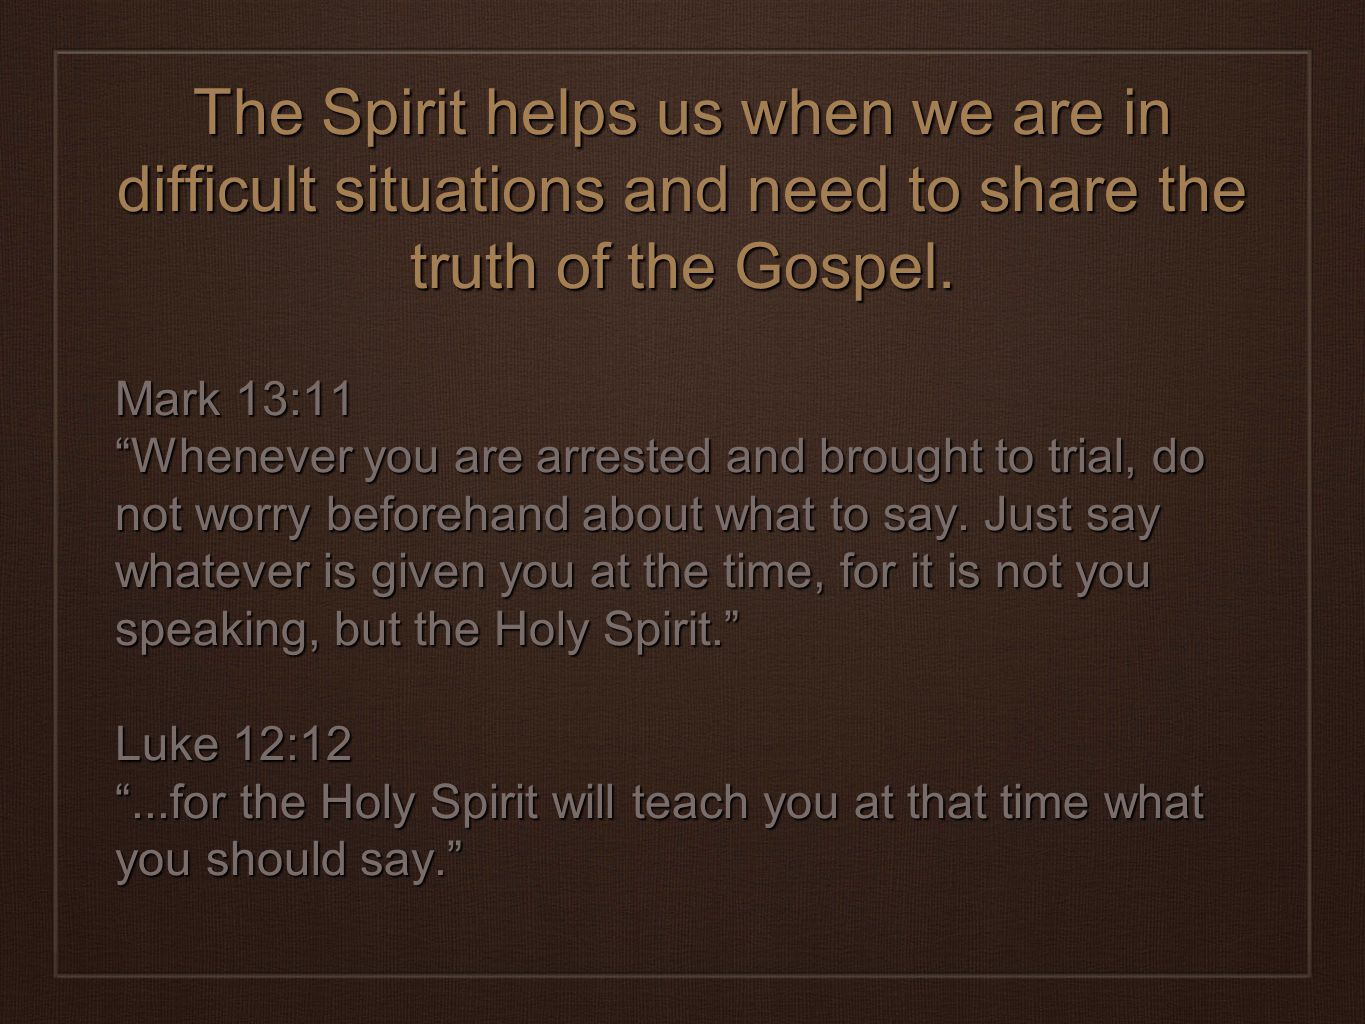 The Spirit helps us when we are in difficult situations and need to share the truth of the Gospel.